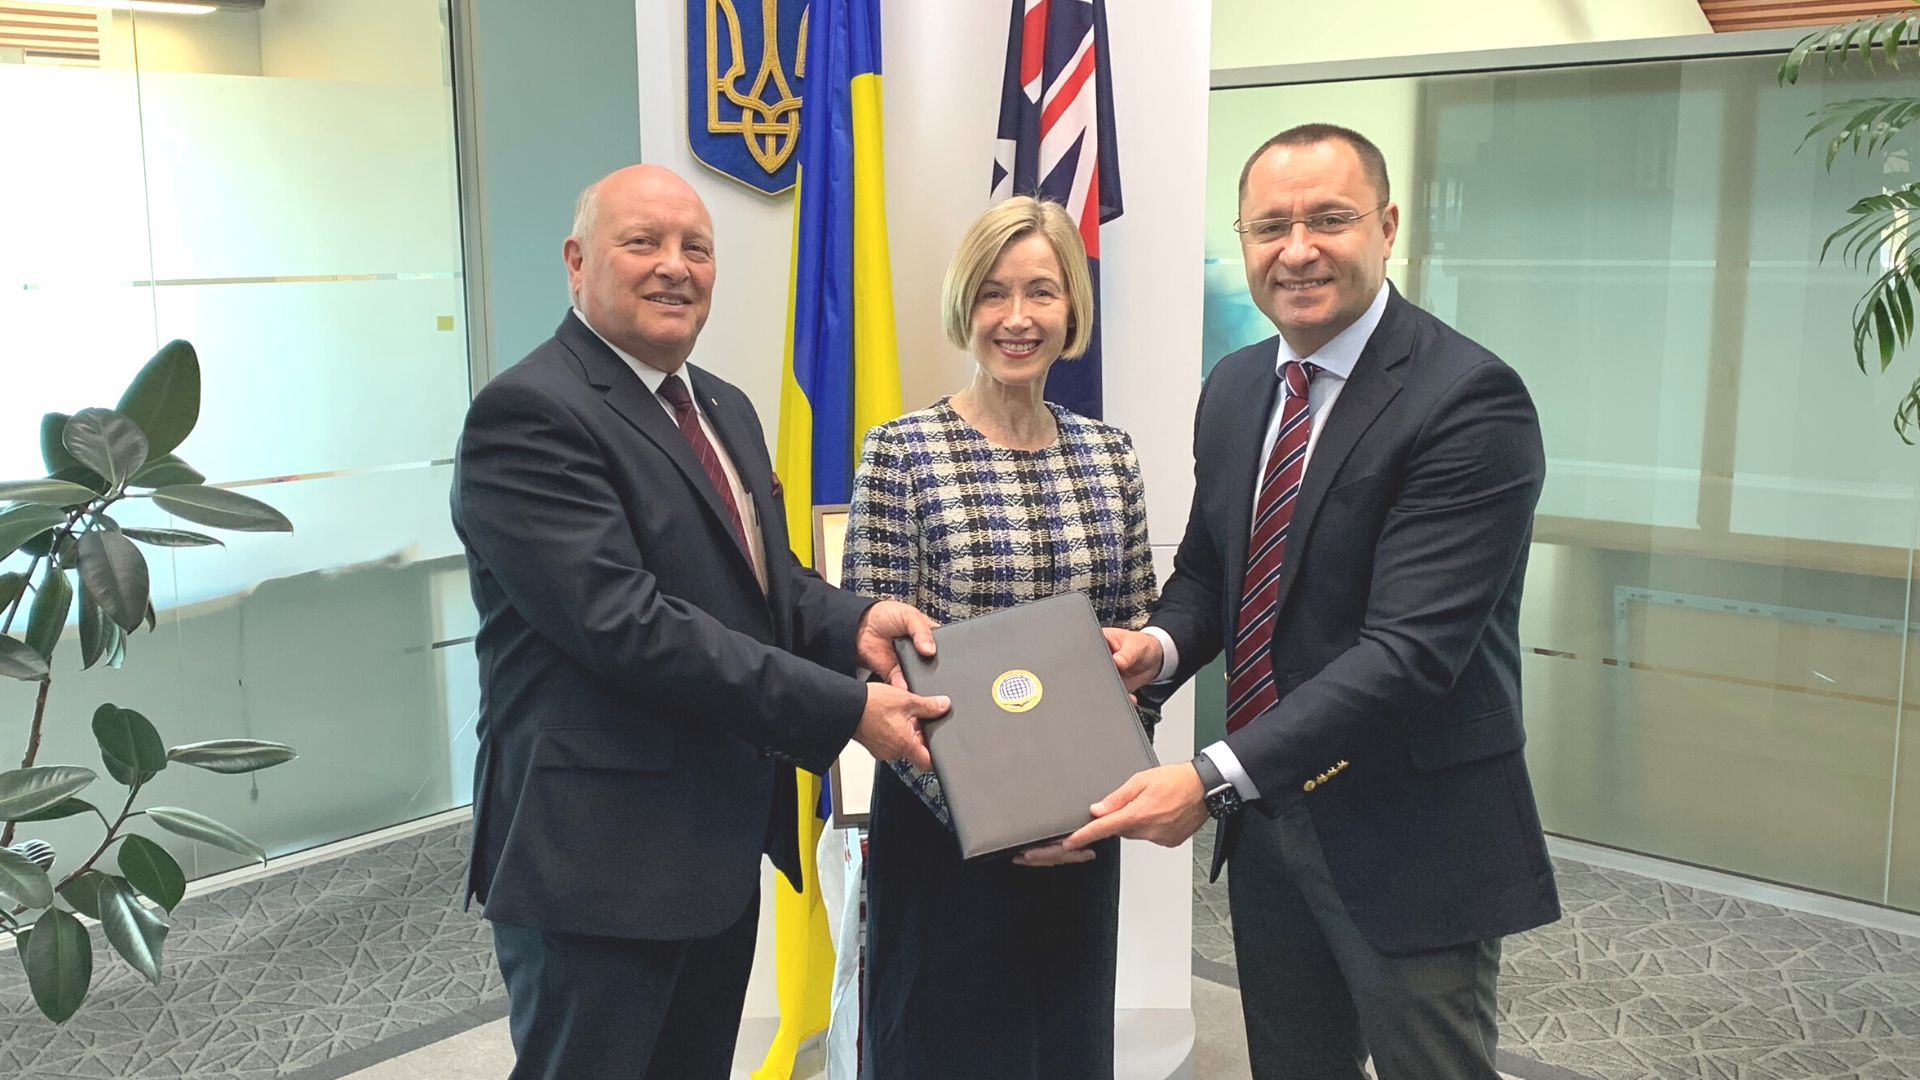 Charles Sturt provides educational support to Ukraine through higher education resources 